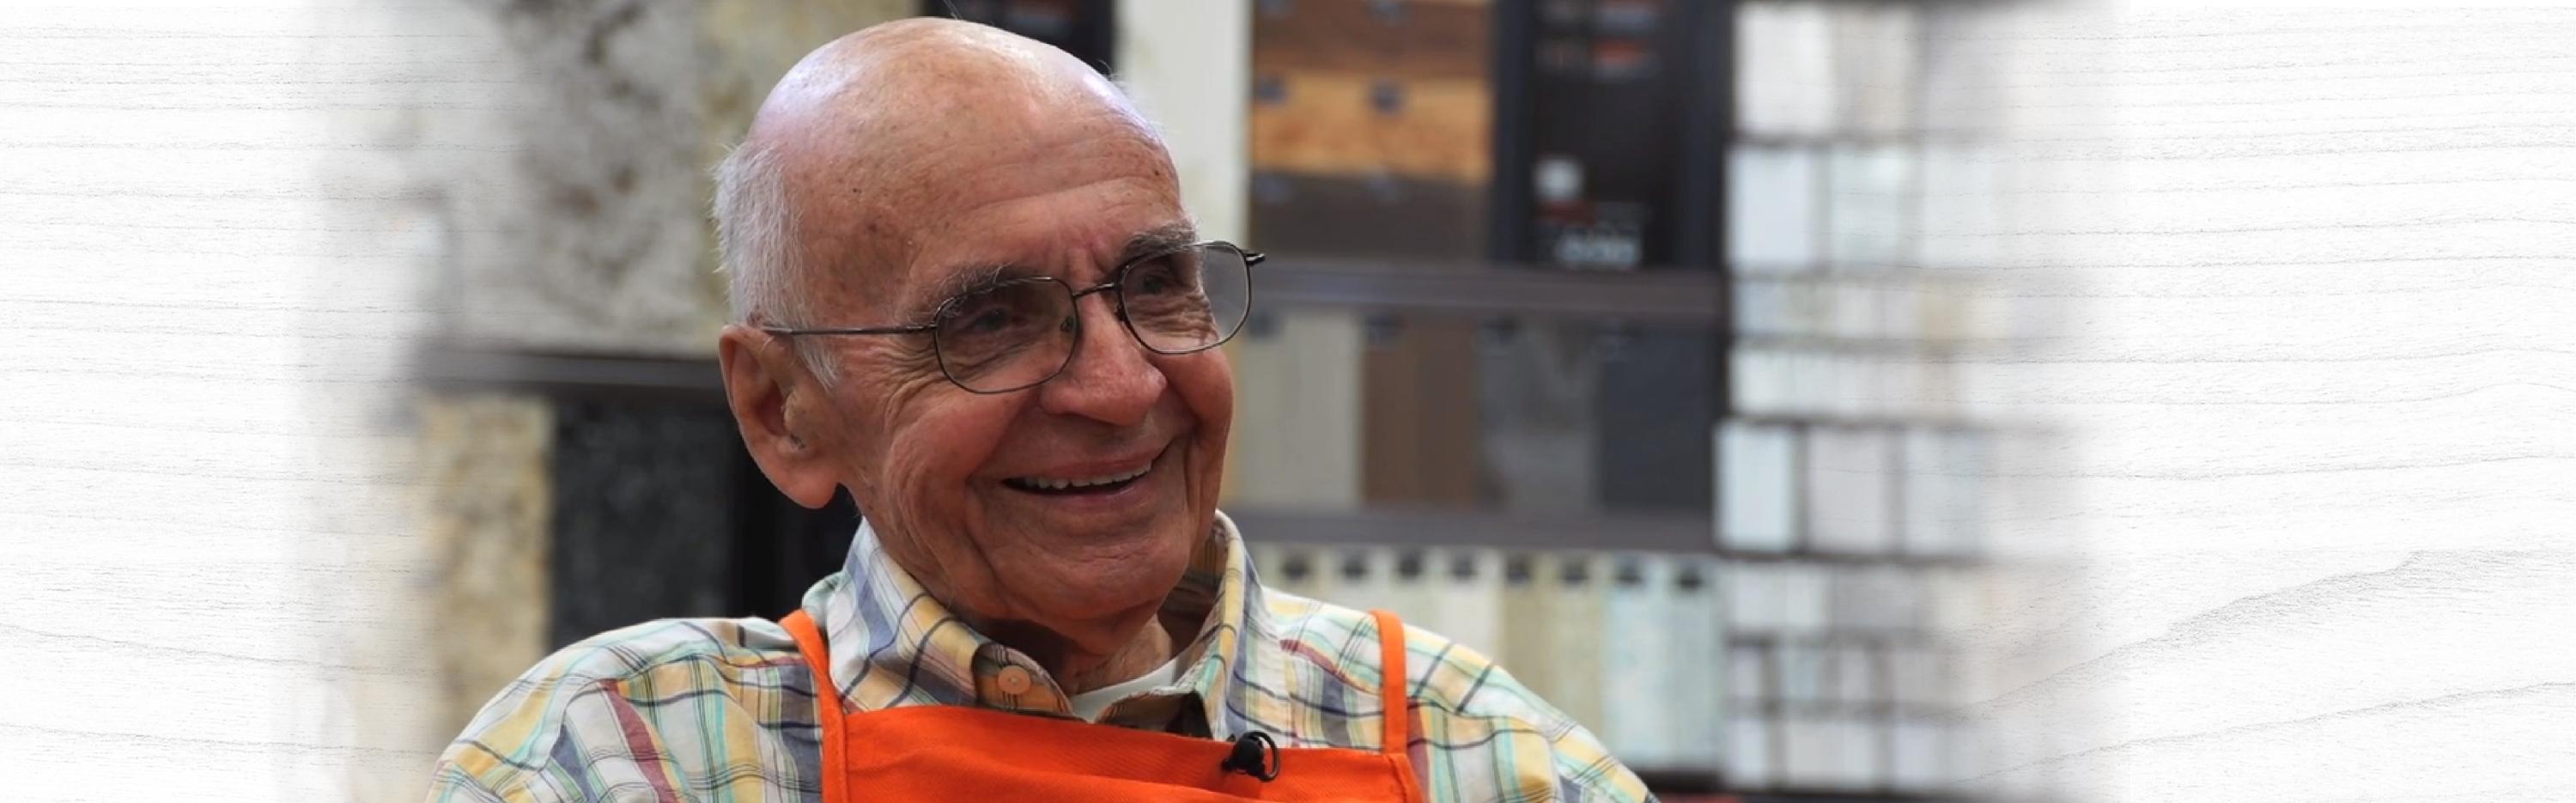 Built to Last: Home Depot Associate Shares Keys to Success at Any Age